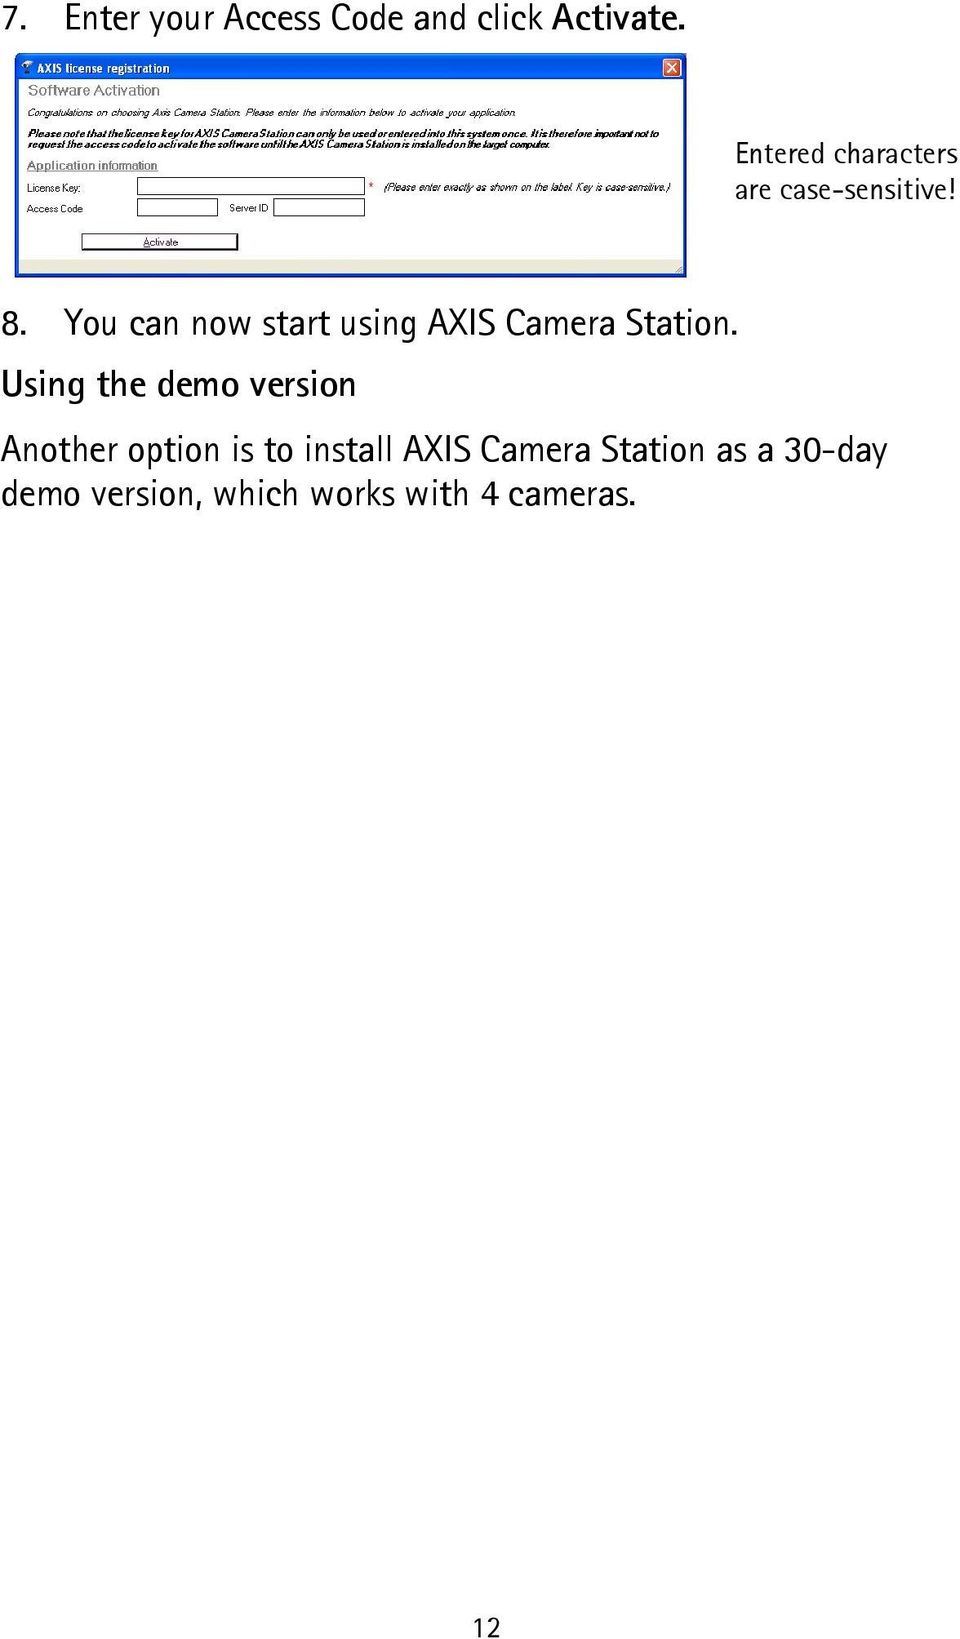 You can now start using AXIS Camera Station.